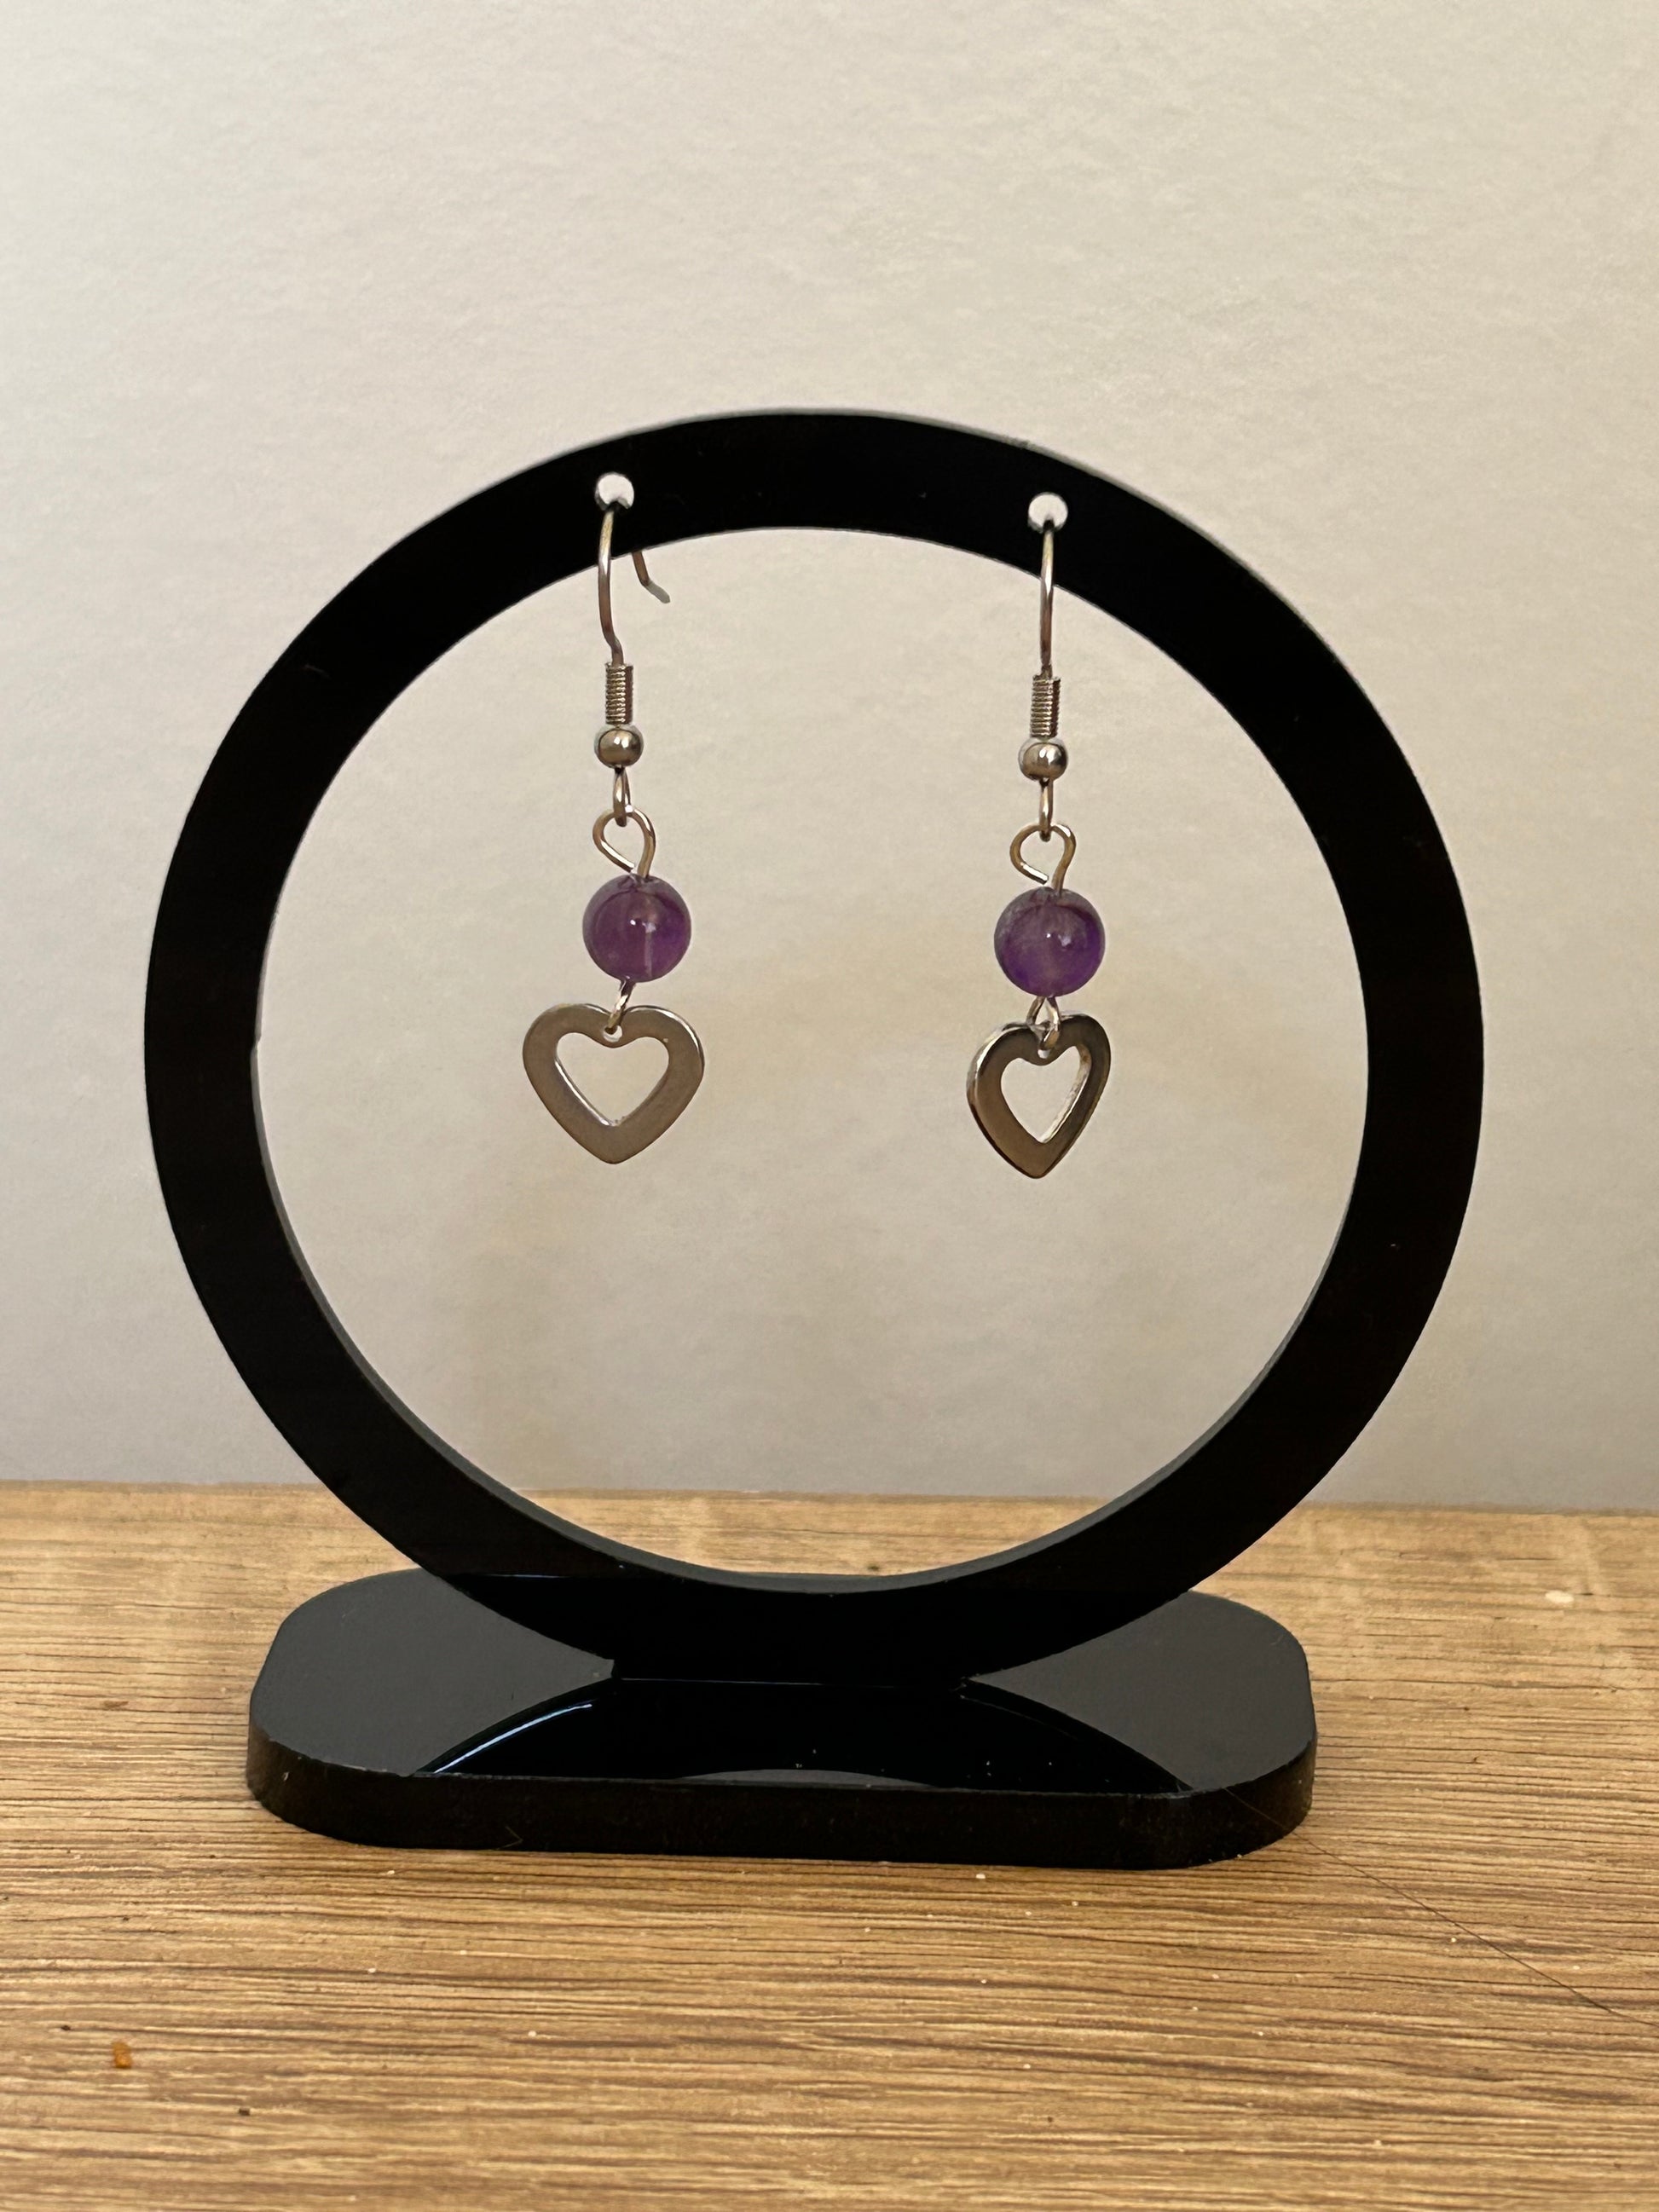 Polished amethyst crystal bead and silver heart drop earrings